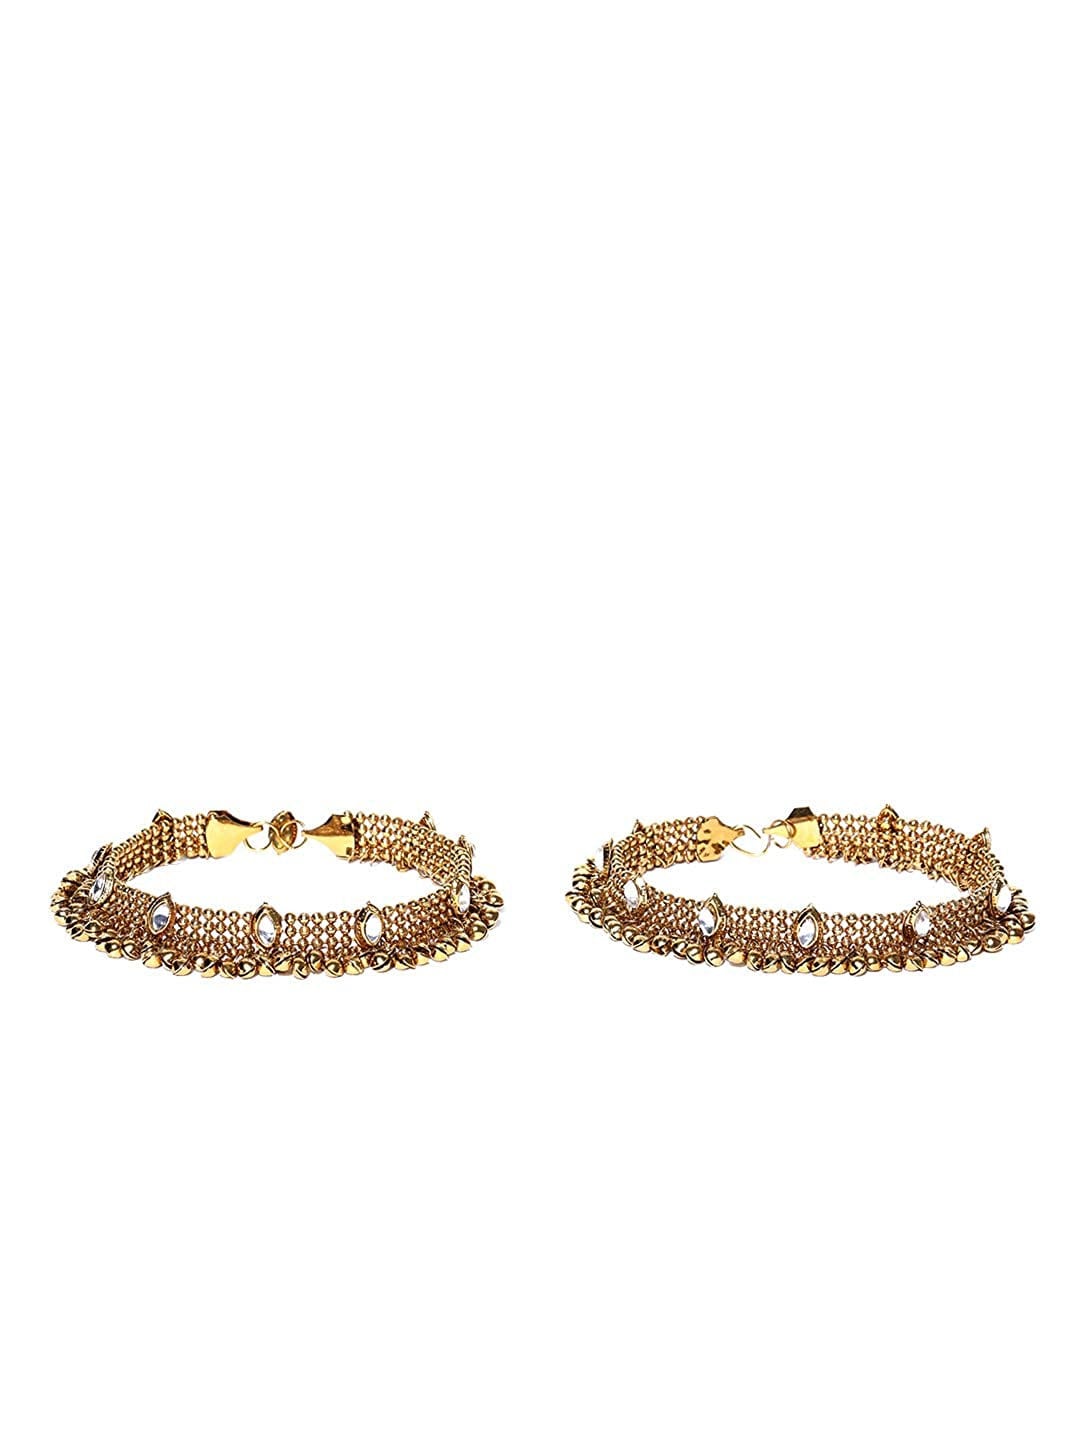 Traditional Gold & Silver Plated Handcrafted Payal/Anklets, Anklets for women, Indian anklet, Gold ankle bracelet pair for women